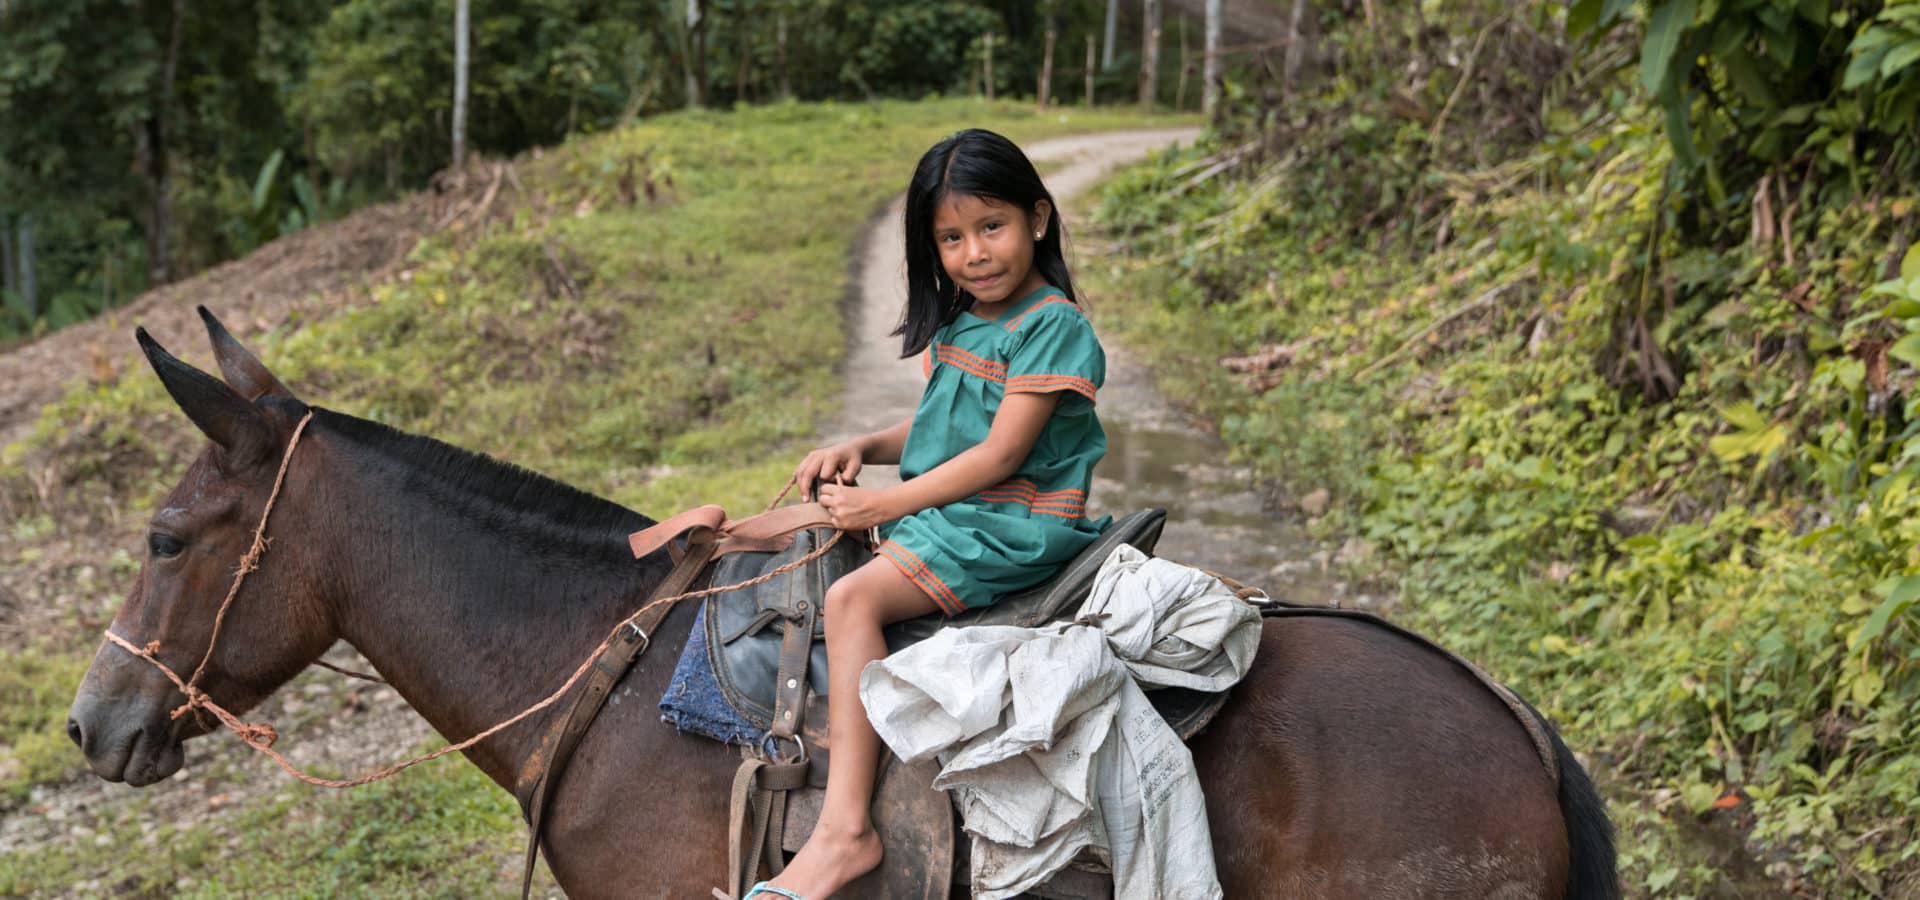 Little girl wearing a green dress riding a dark brown horse in the forest